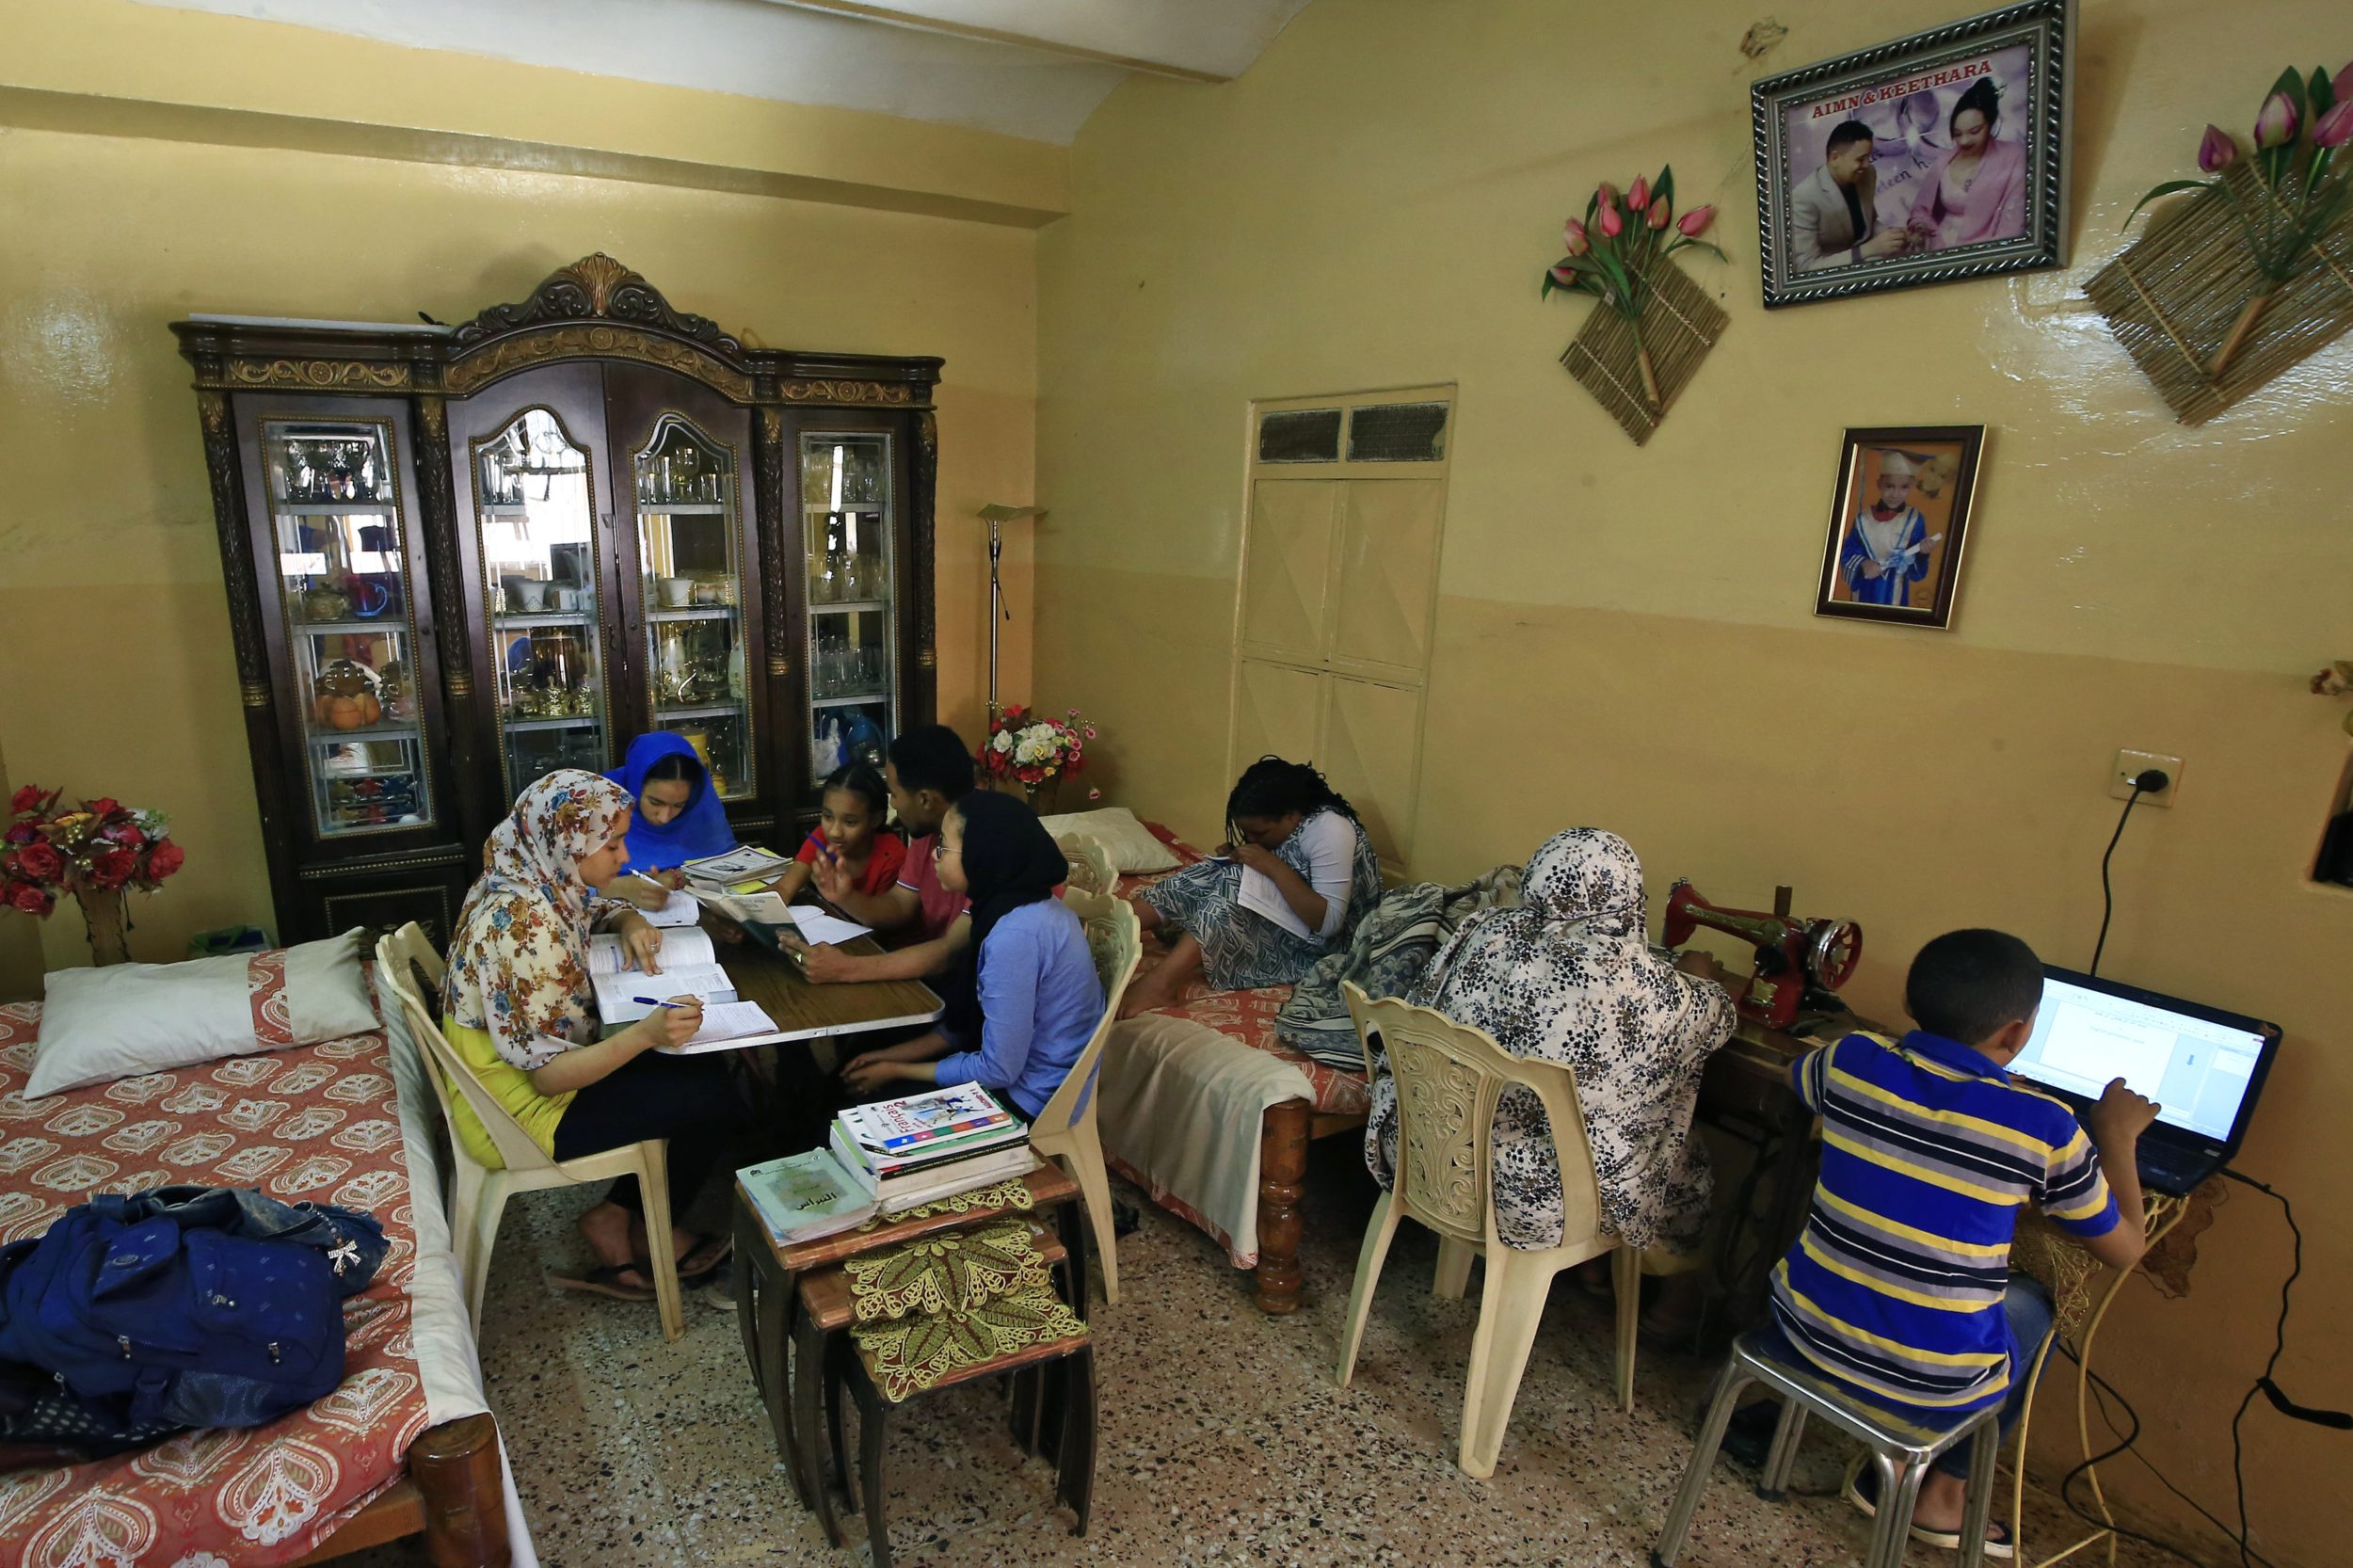 Members of a family study together at home in Khartoum on 23 March, as schools and universities close as a preventive measure against the spread of the Covid-19 virus (AFP)